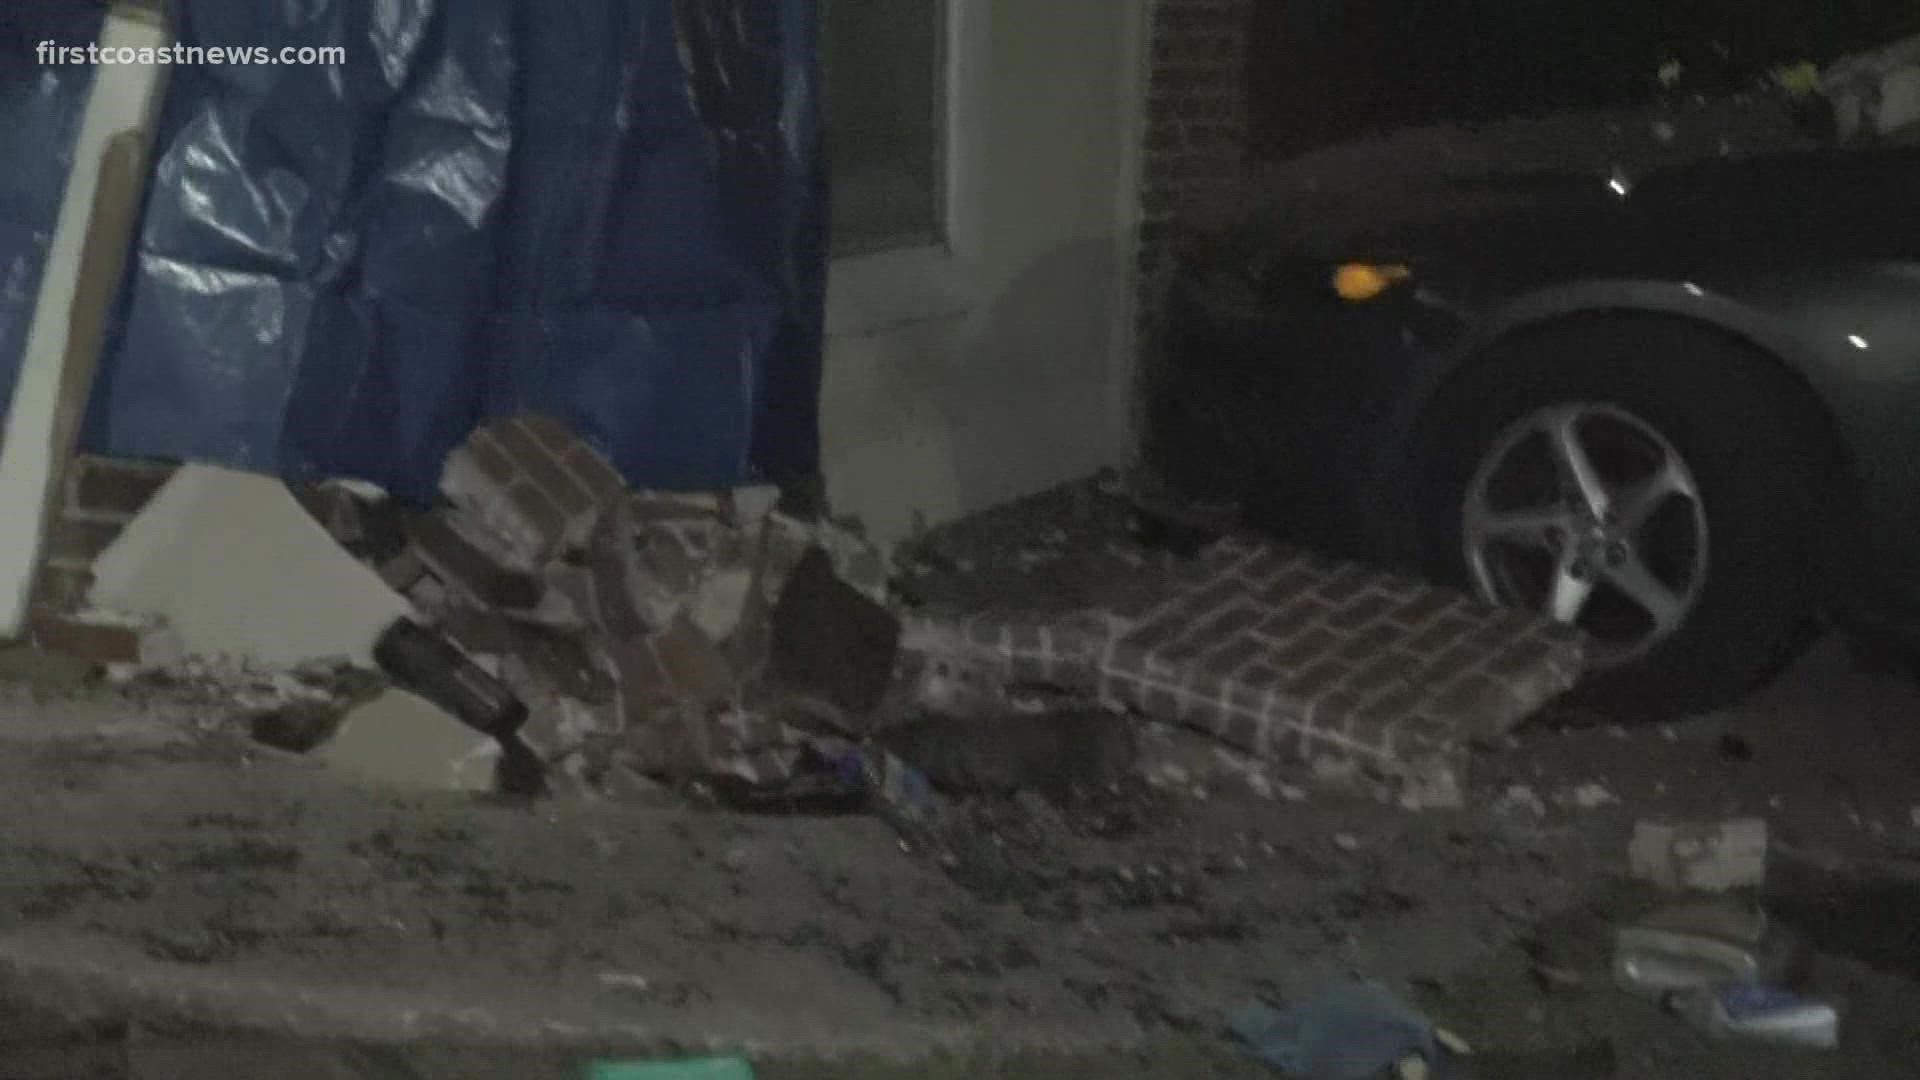 The Jacksonville Sheriff's Office is investigating after a car crashed into a home on the Westside Sunday night.